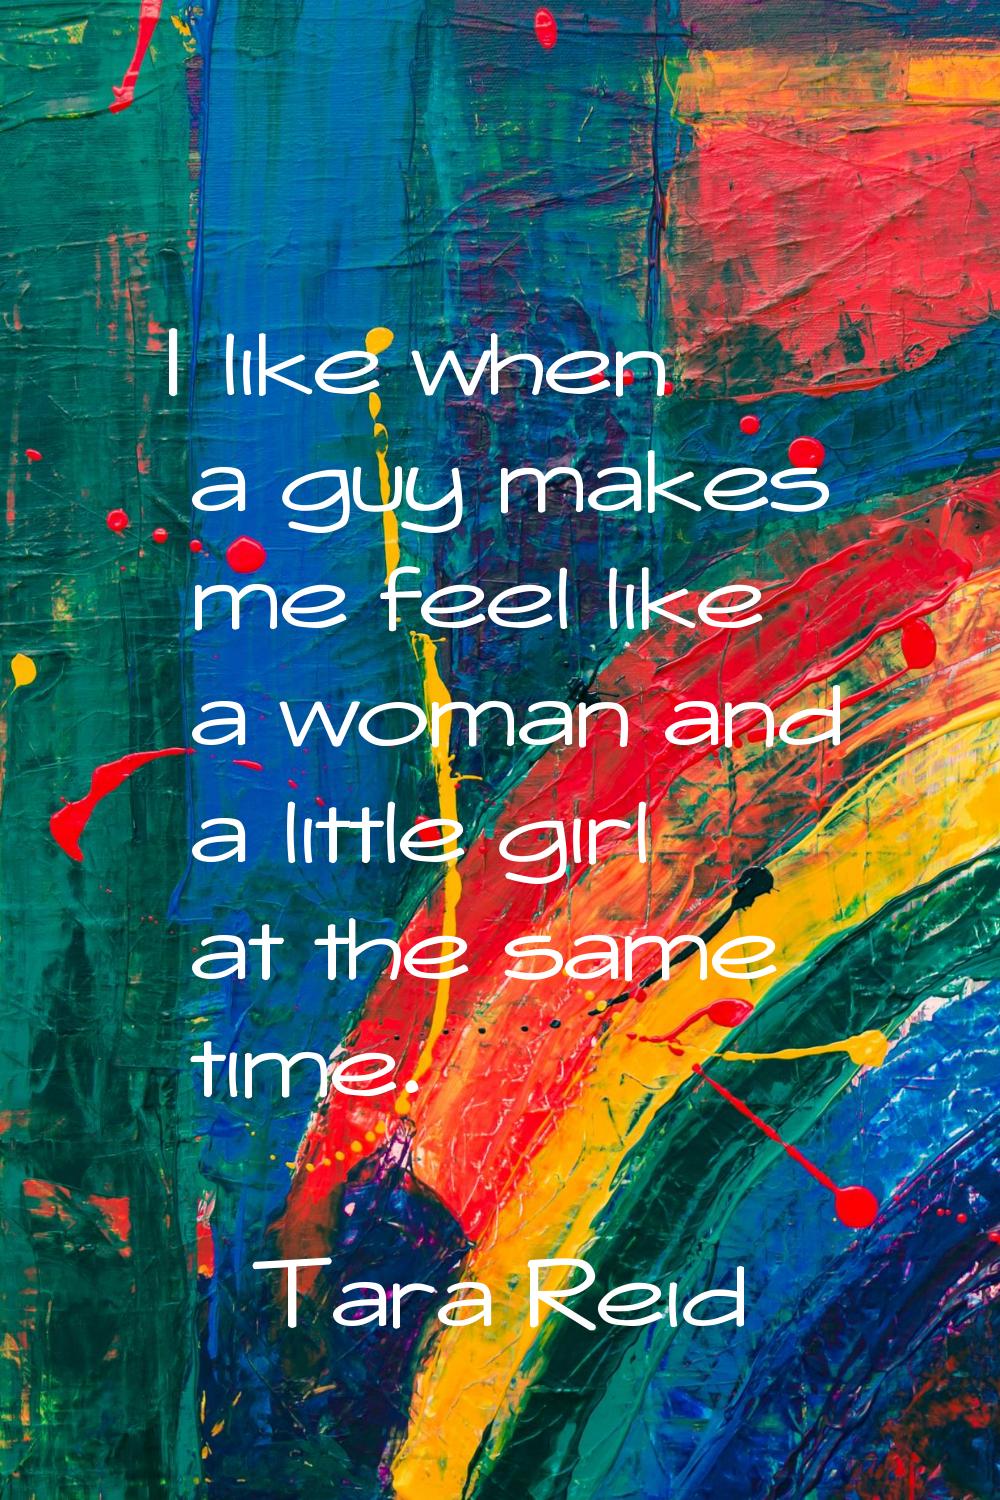 I like when a guy makes me feel like a woman and a little girl at the same time.